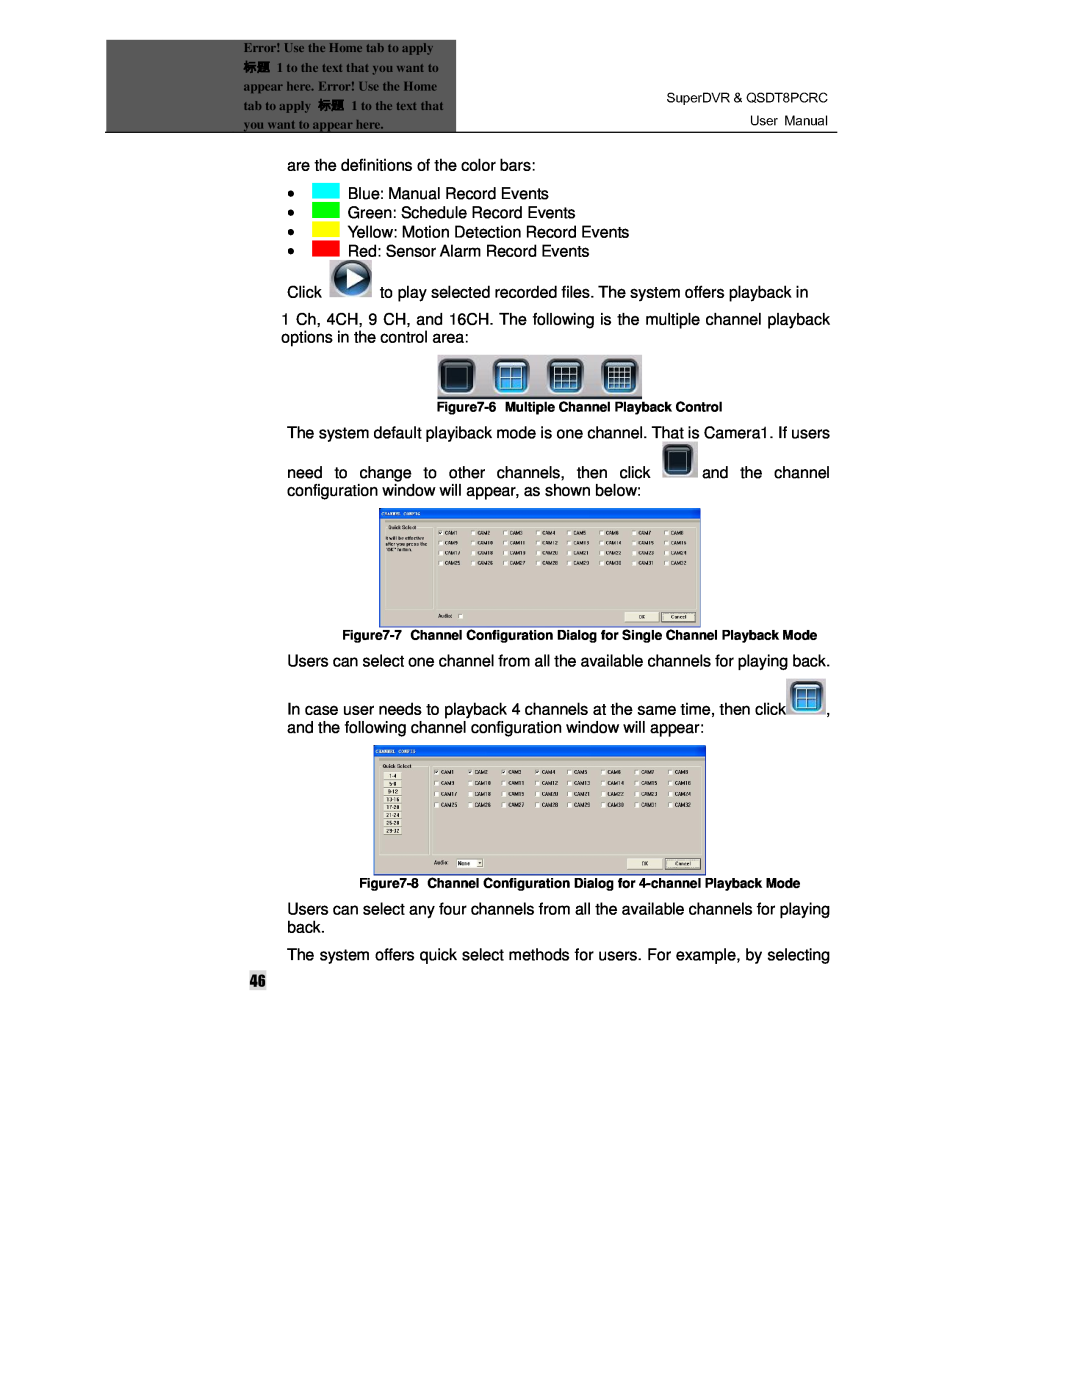 Q-See QSDT8PCRC manual User Manual, are the definitions of the color bars 